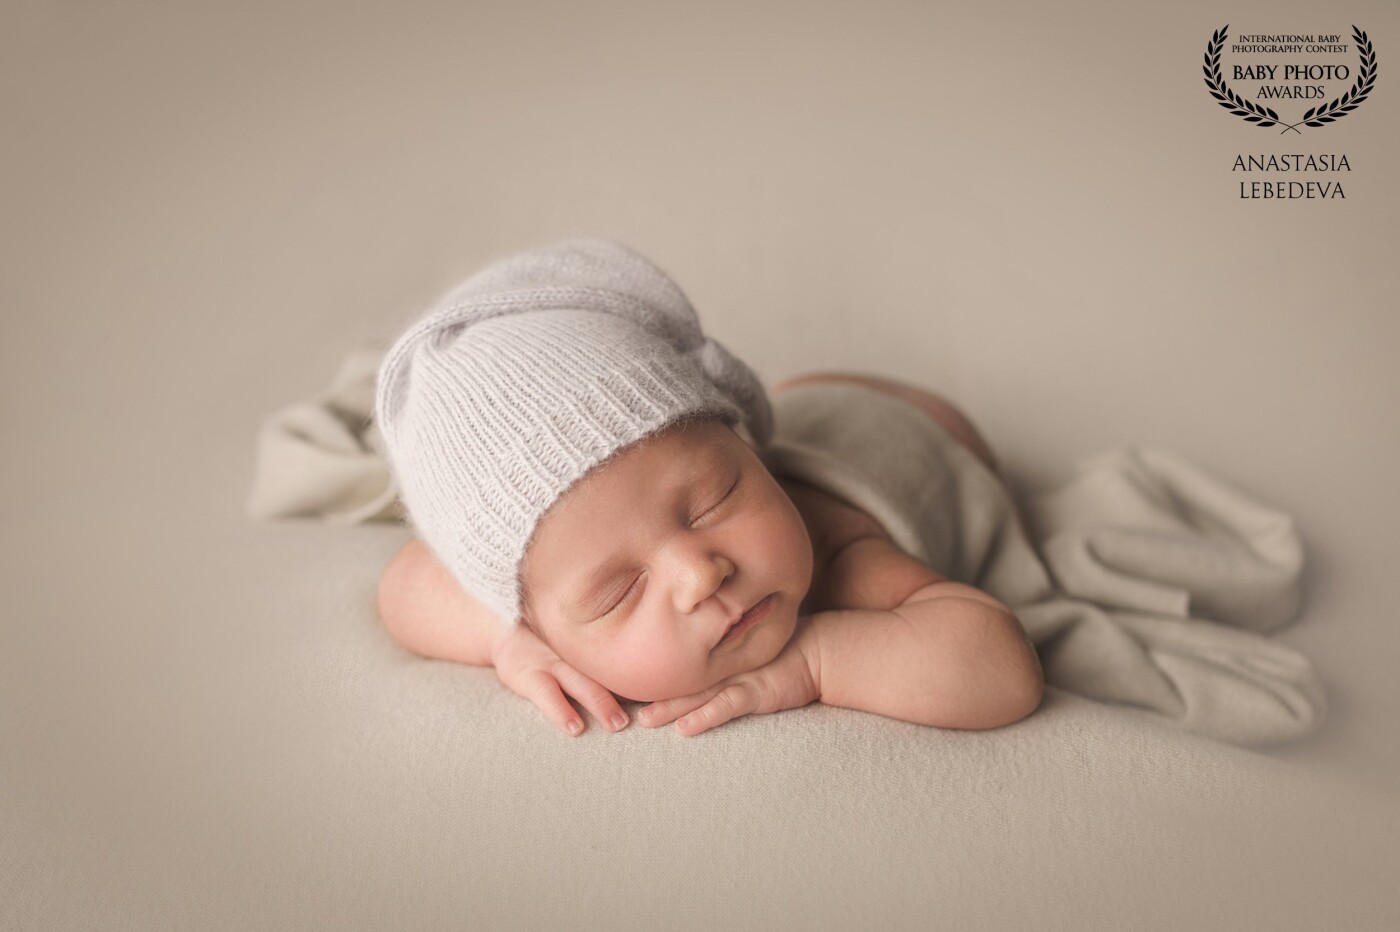 How glad I am to be in the 81 collection again. In this photo, a newborn 14 day old baby Alexander. This photo session was very memorable and loved. Everything was so easy and simple!